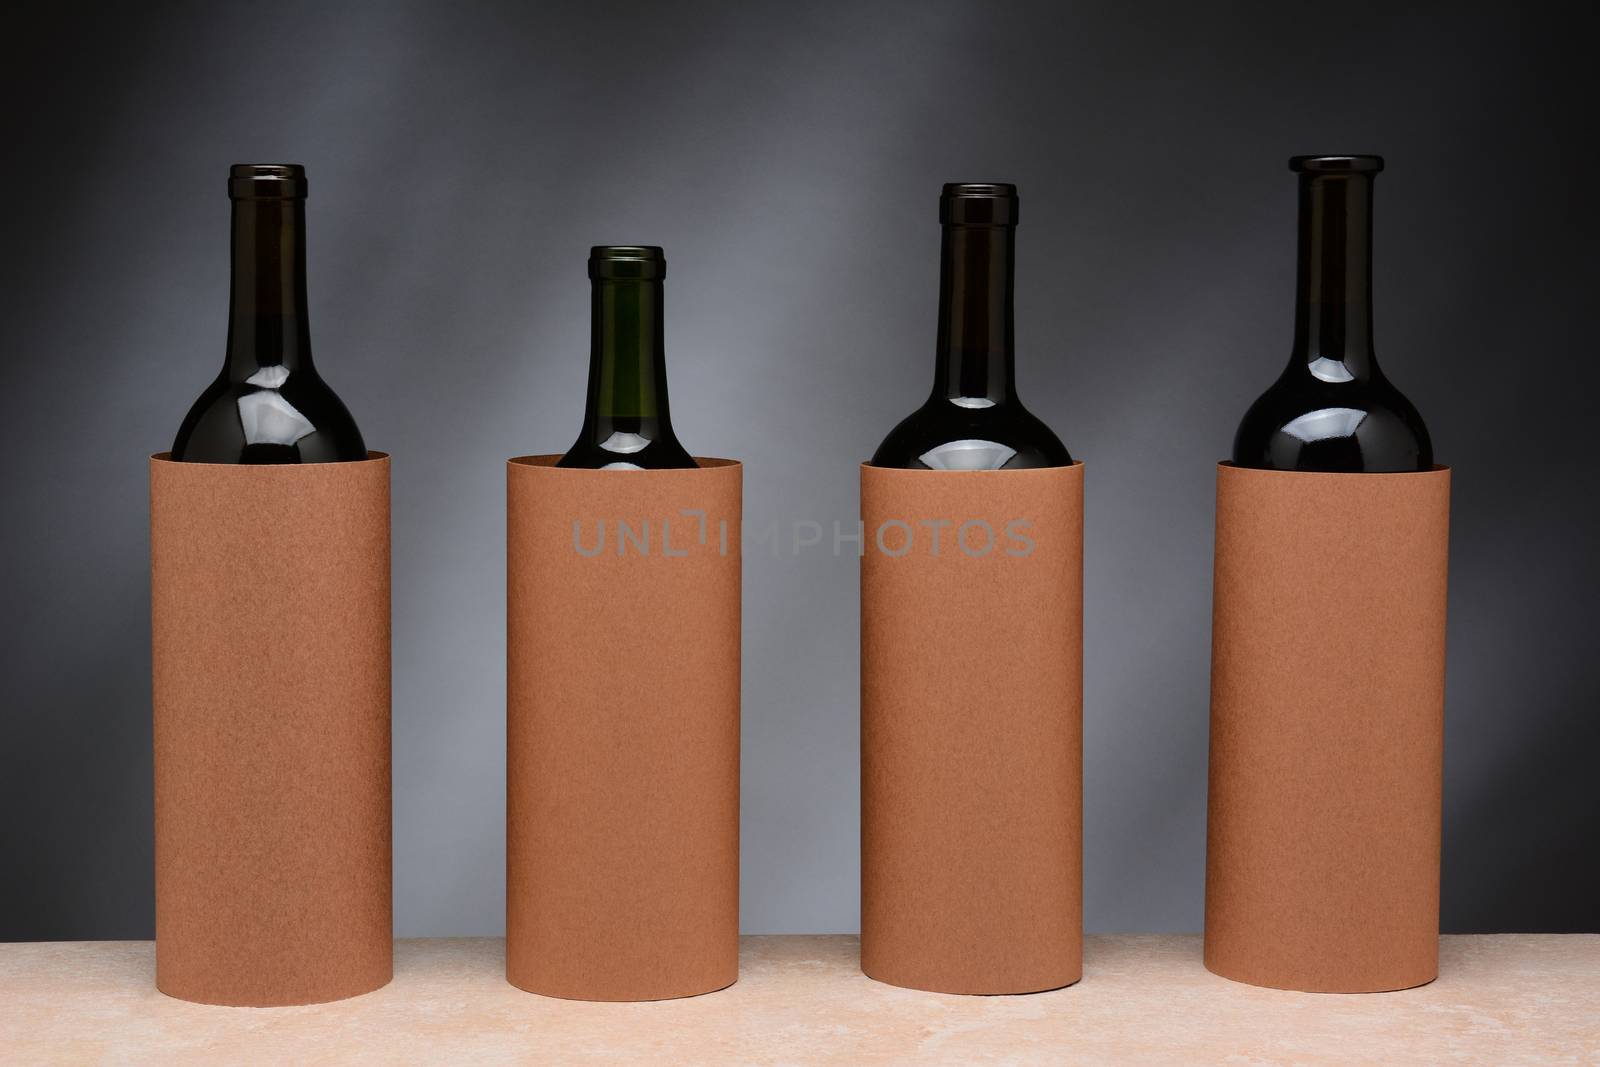 Four different wine bottles set up for a blind wine tasting. The bottles are covered by blank cylinders to hide the label. Horizontal format. 